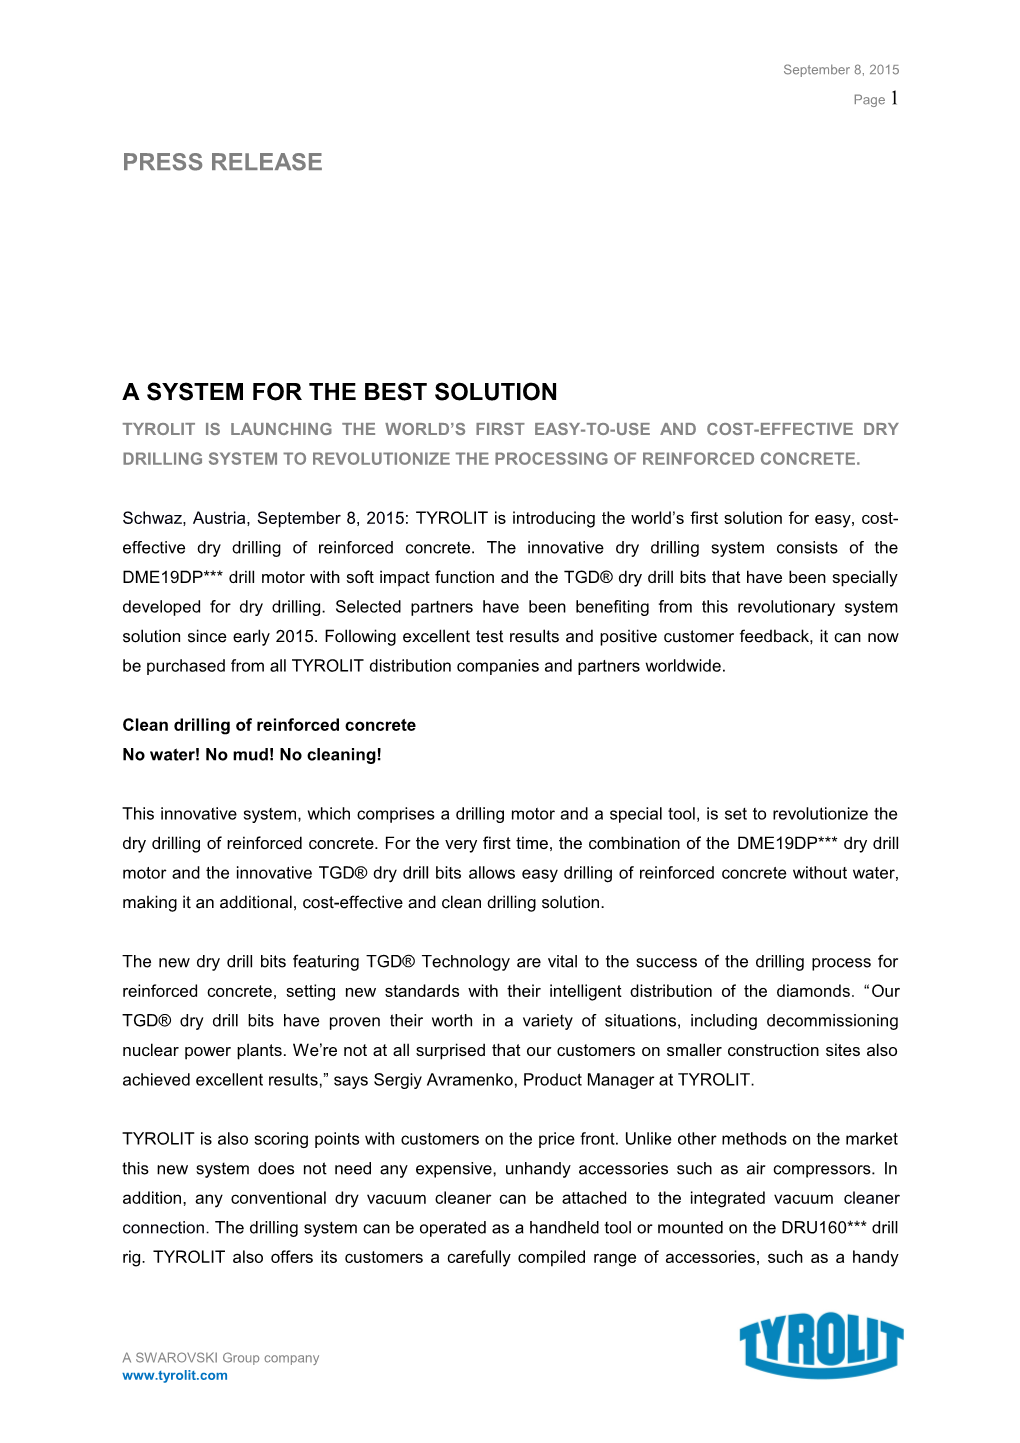 A System for the Best Solution